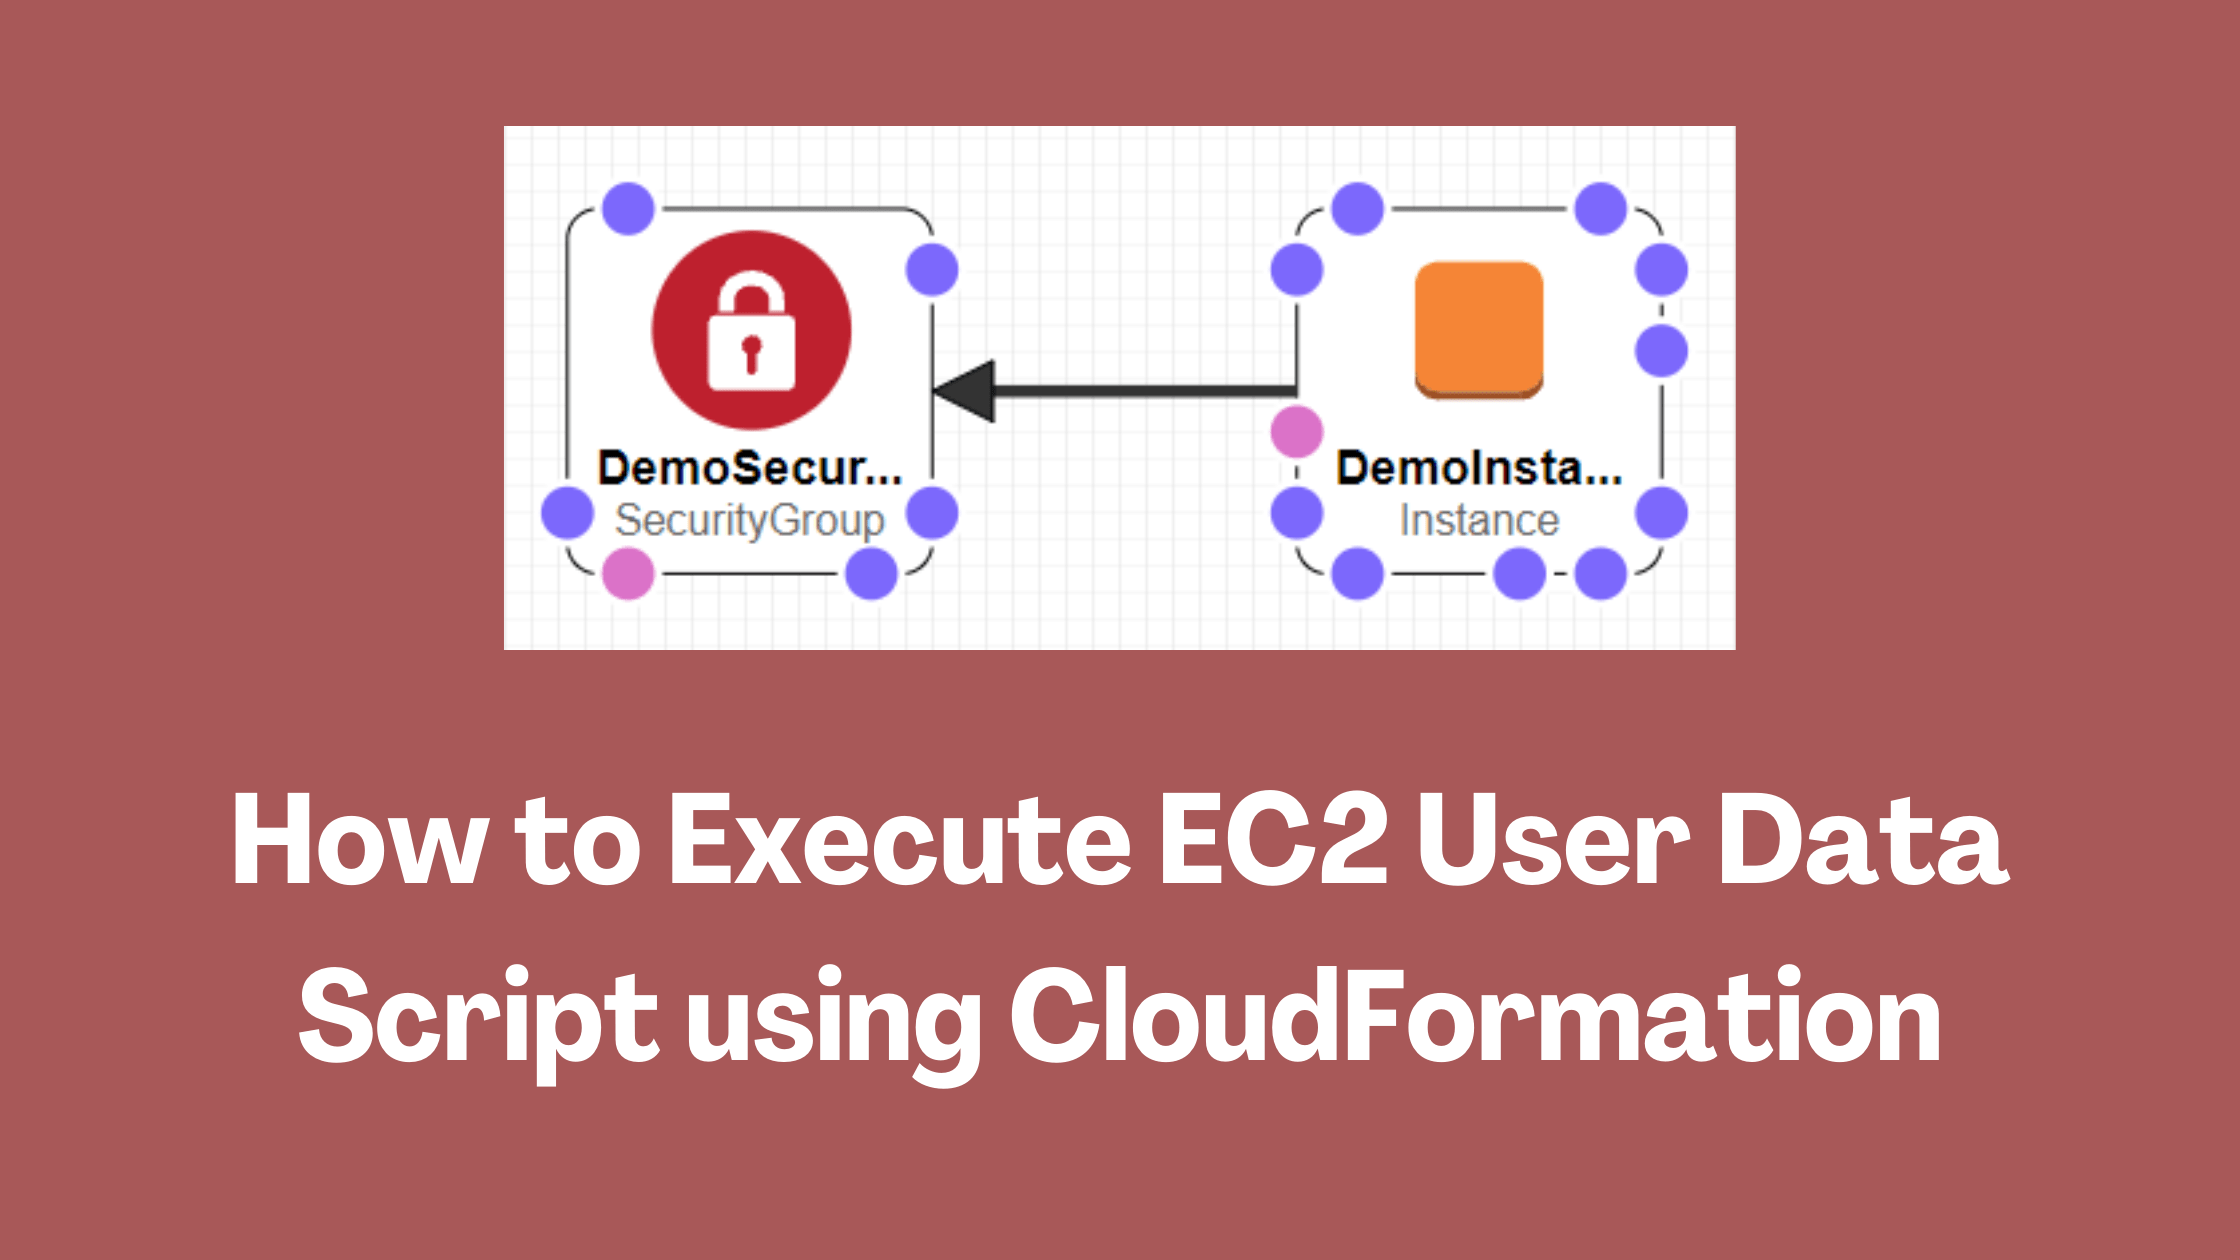 How to Execute EC2 User Data Script using CloudFormation